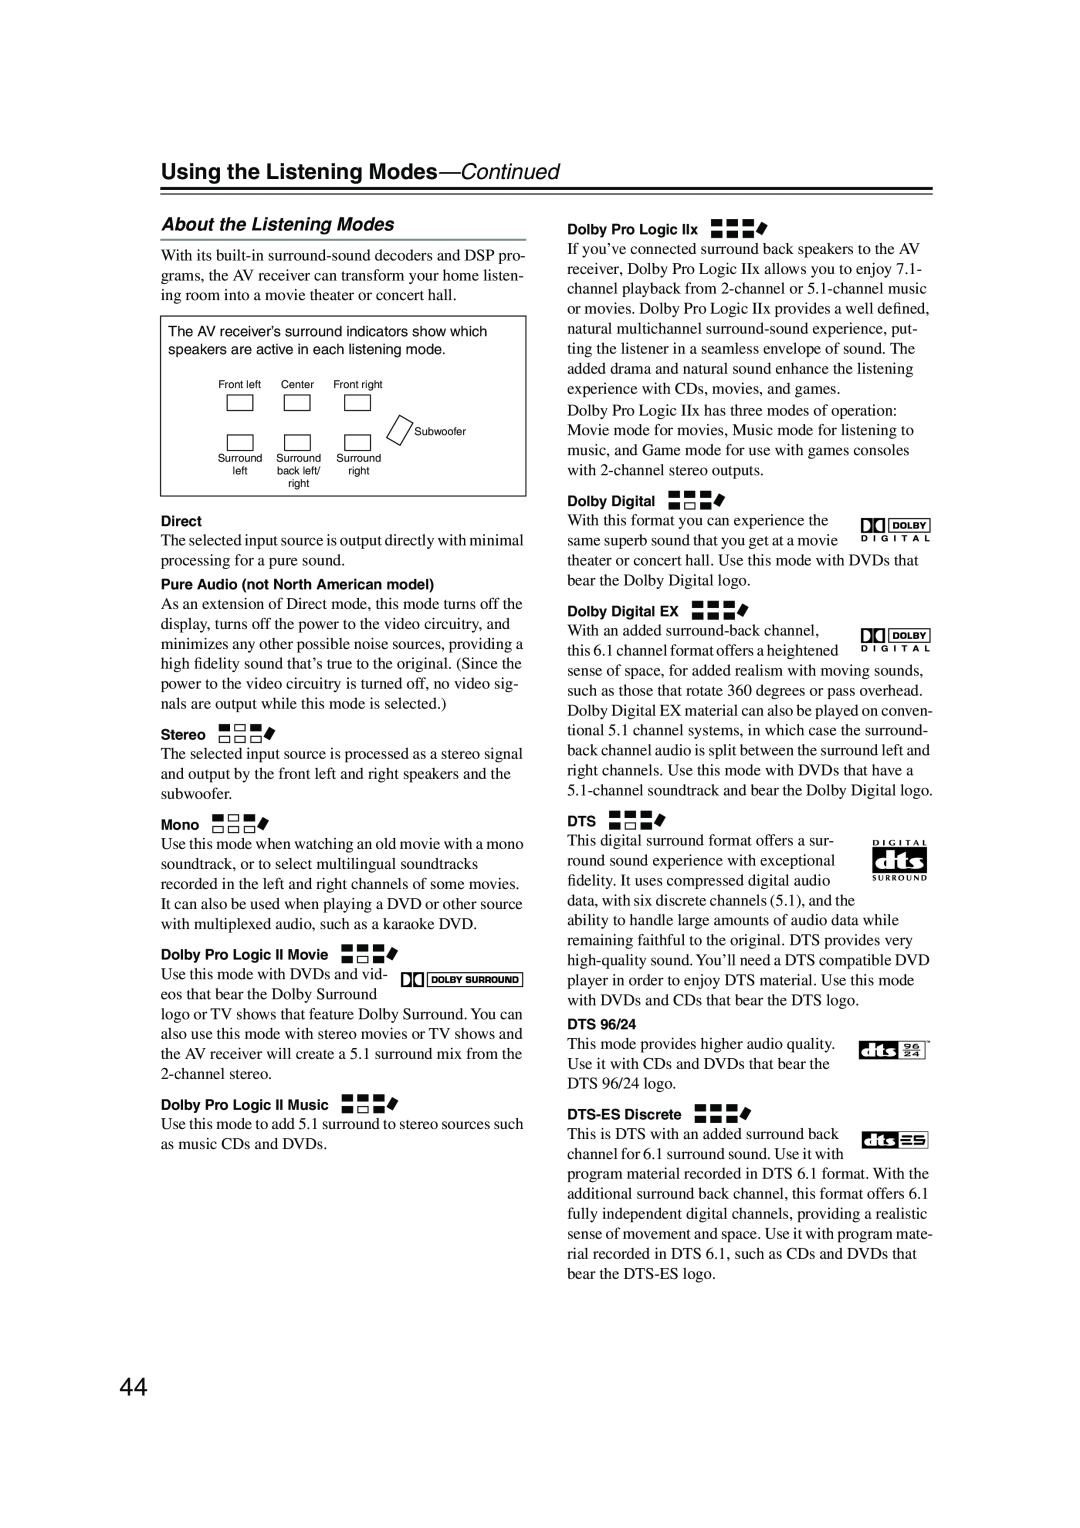 Onkyo TX-SR503E, TX-SR8350 instruction manual About the Listening Modes, Using the Listening Modes—Continued 